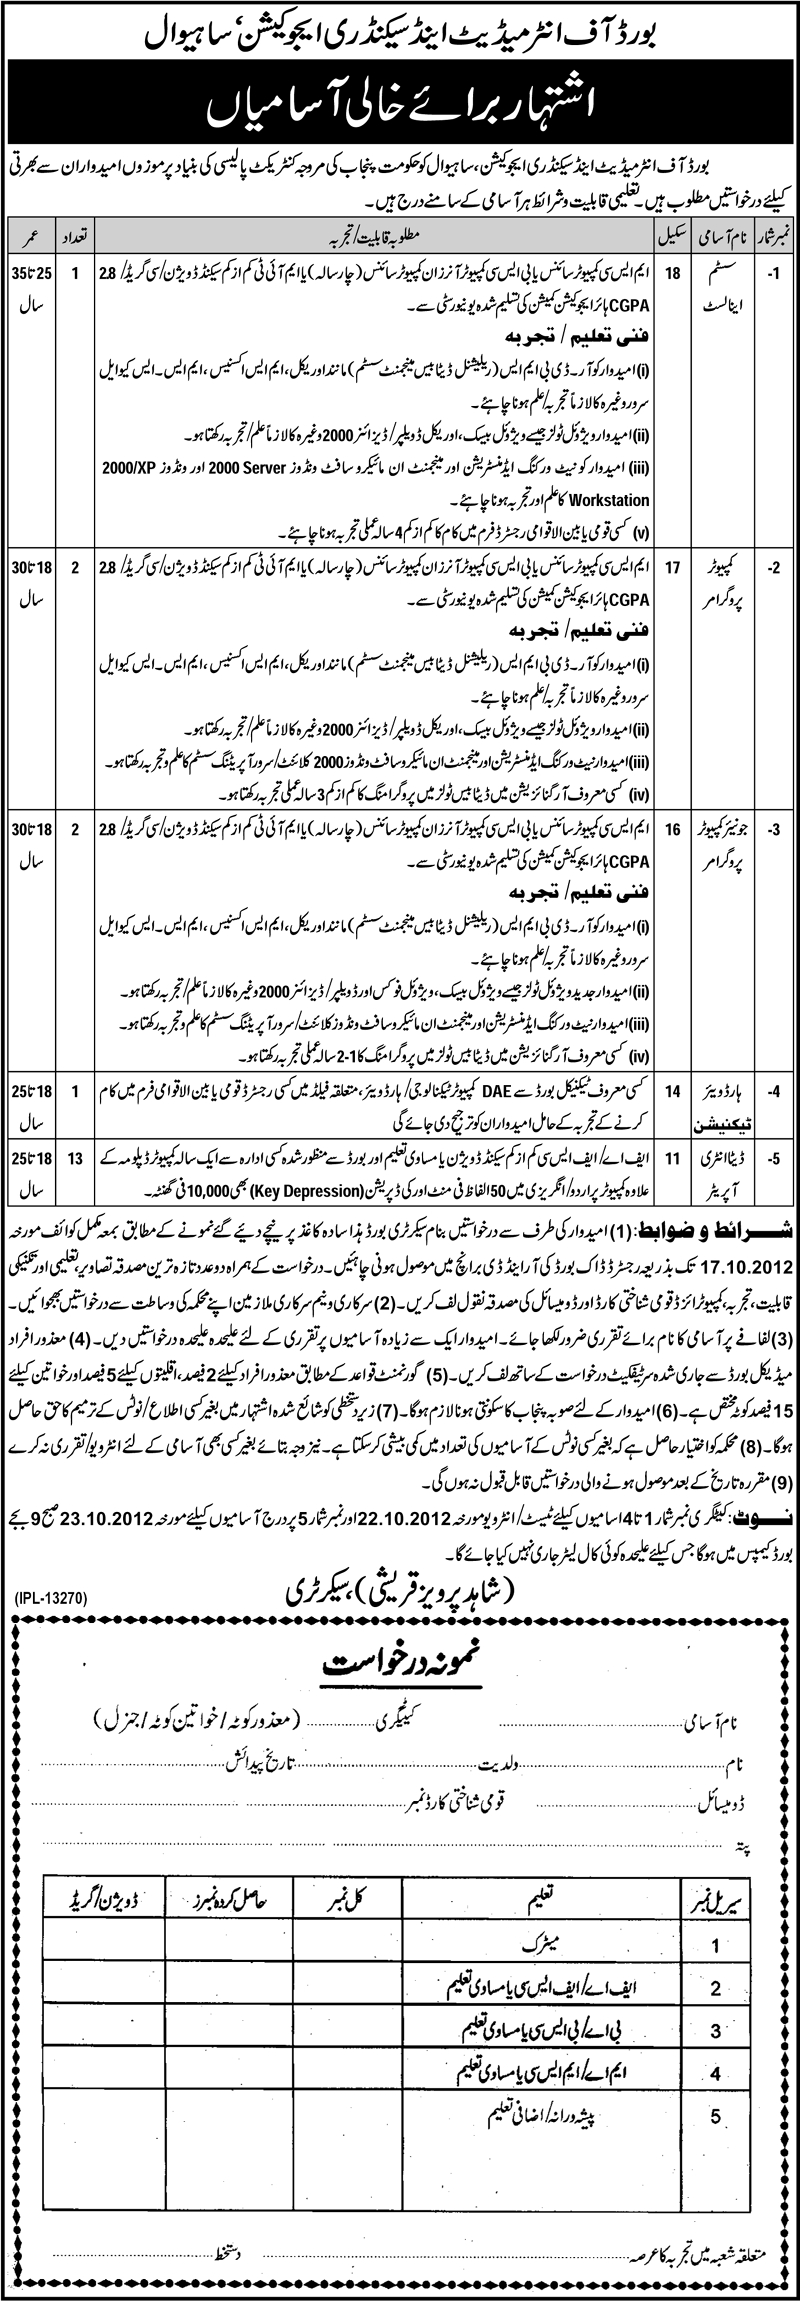 BISE Board of Intermediate and Secondary Education Sahiwal Requires IT Staff (Government Job)